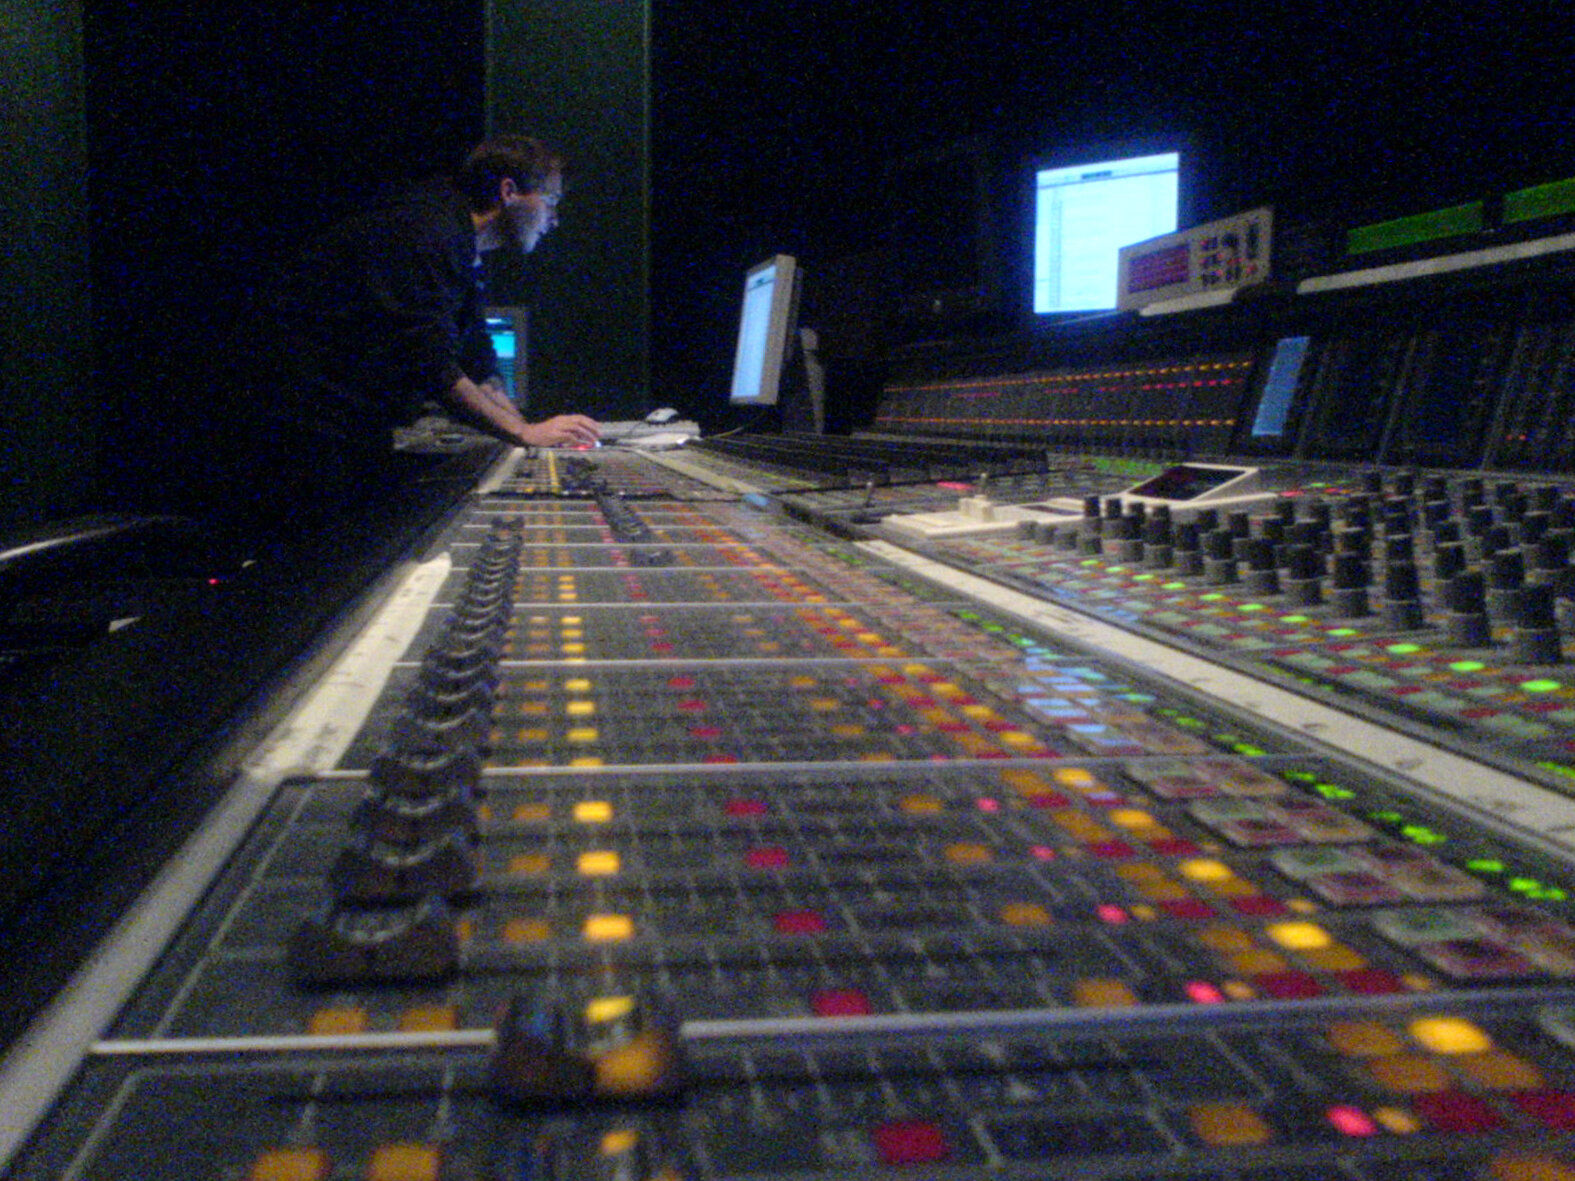 Matthias Schwab mixing the sound for Soft at Elektrofilm in Berlin, an amazing facility that covers every aspect of post-production.